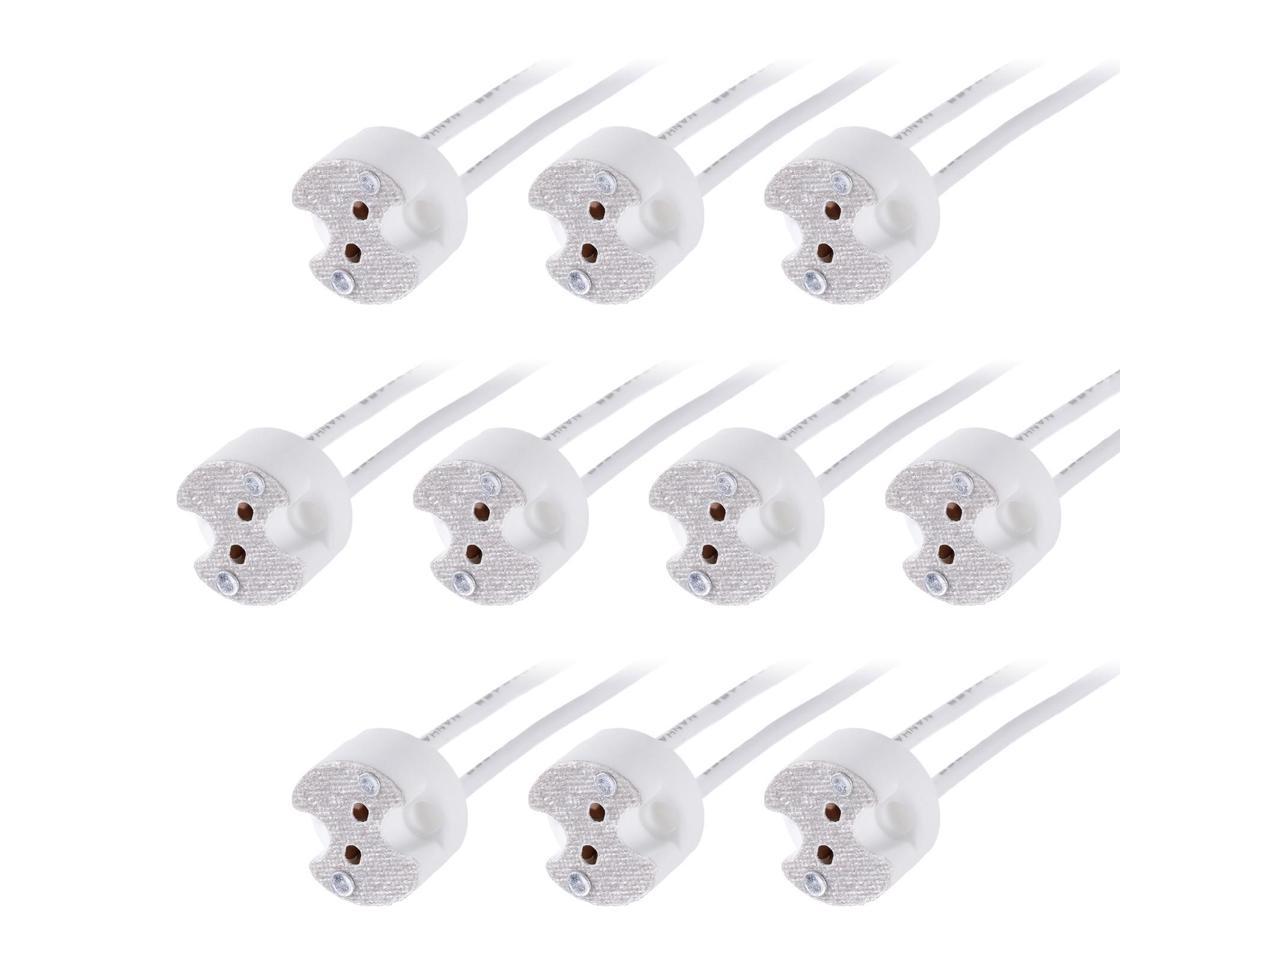 10x Socket For LED Halogen GY6.35 G4 GZ6.35 GX5.3 Lamp Light with Cable 